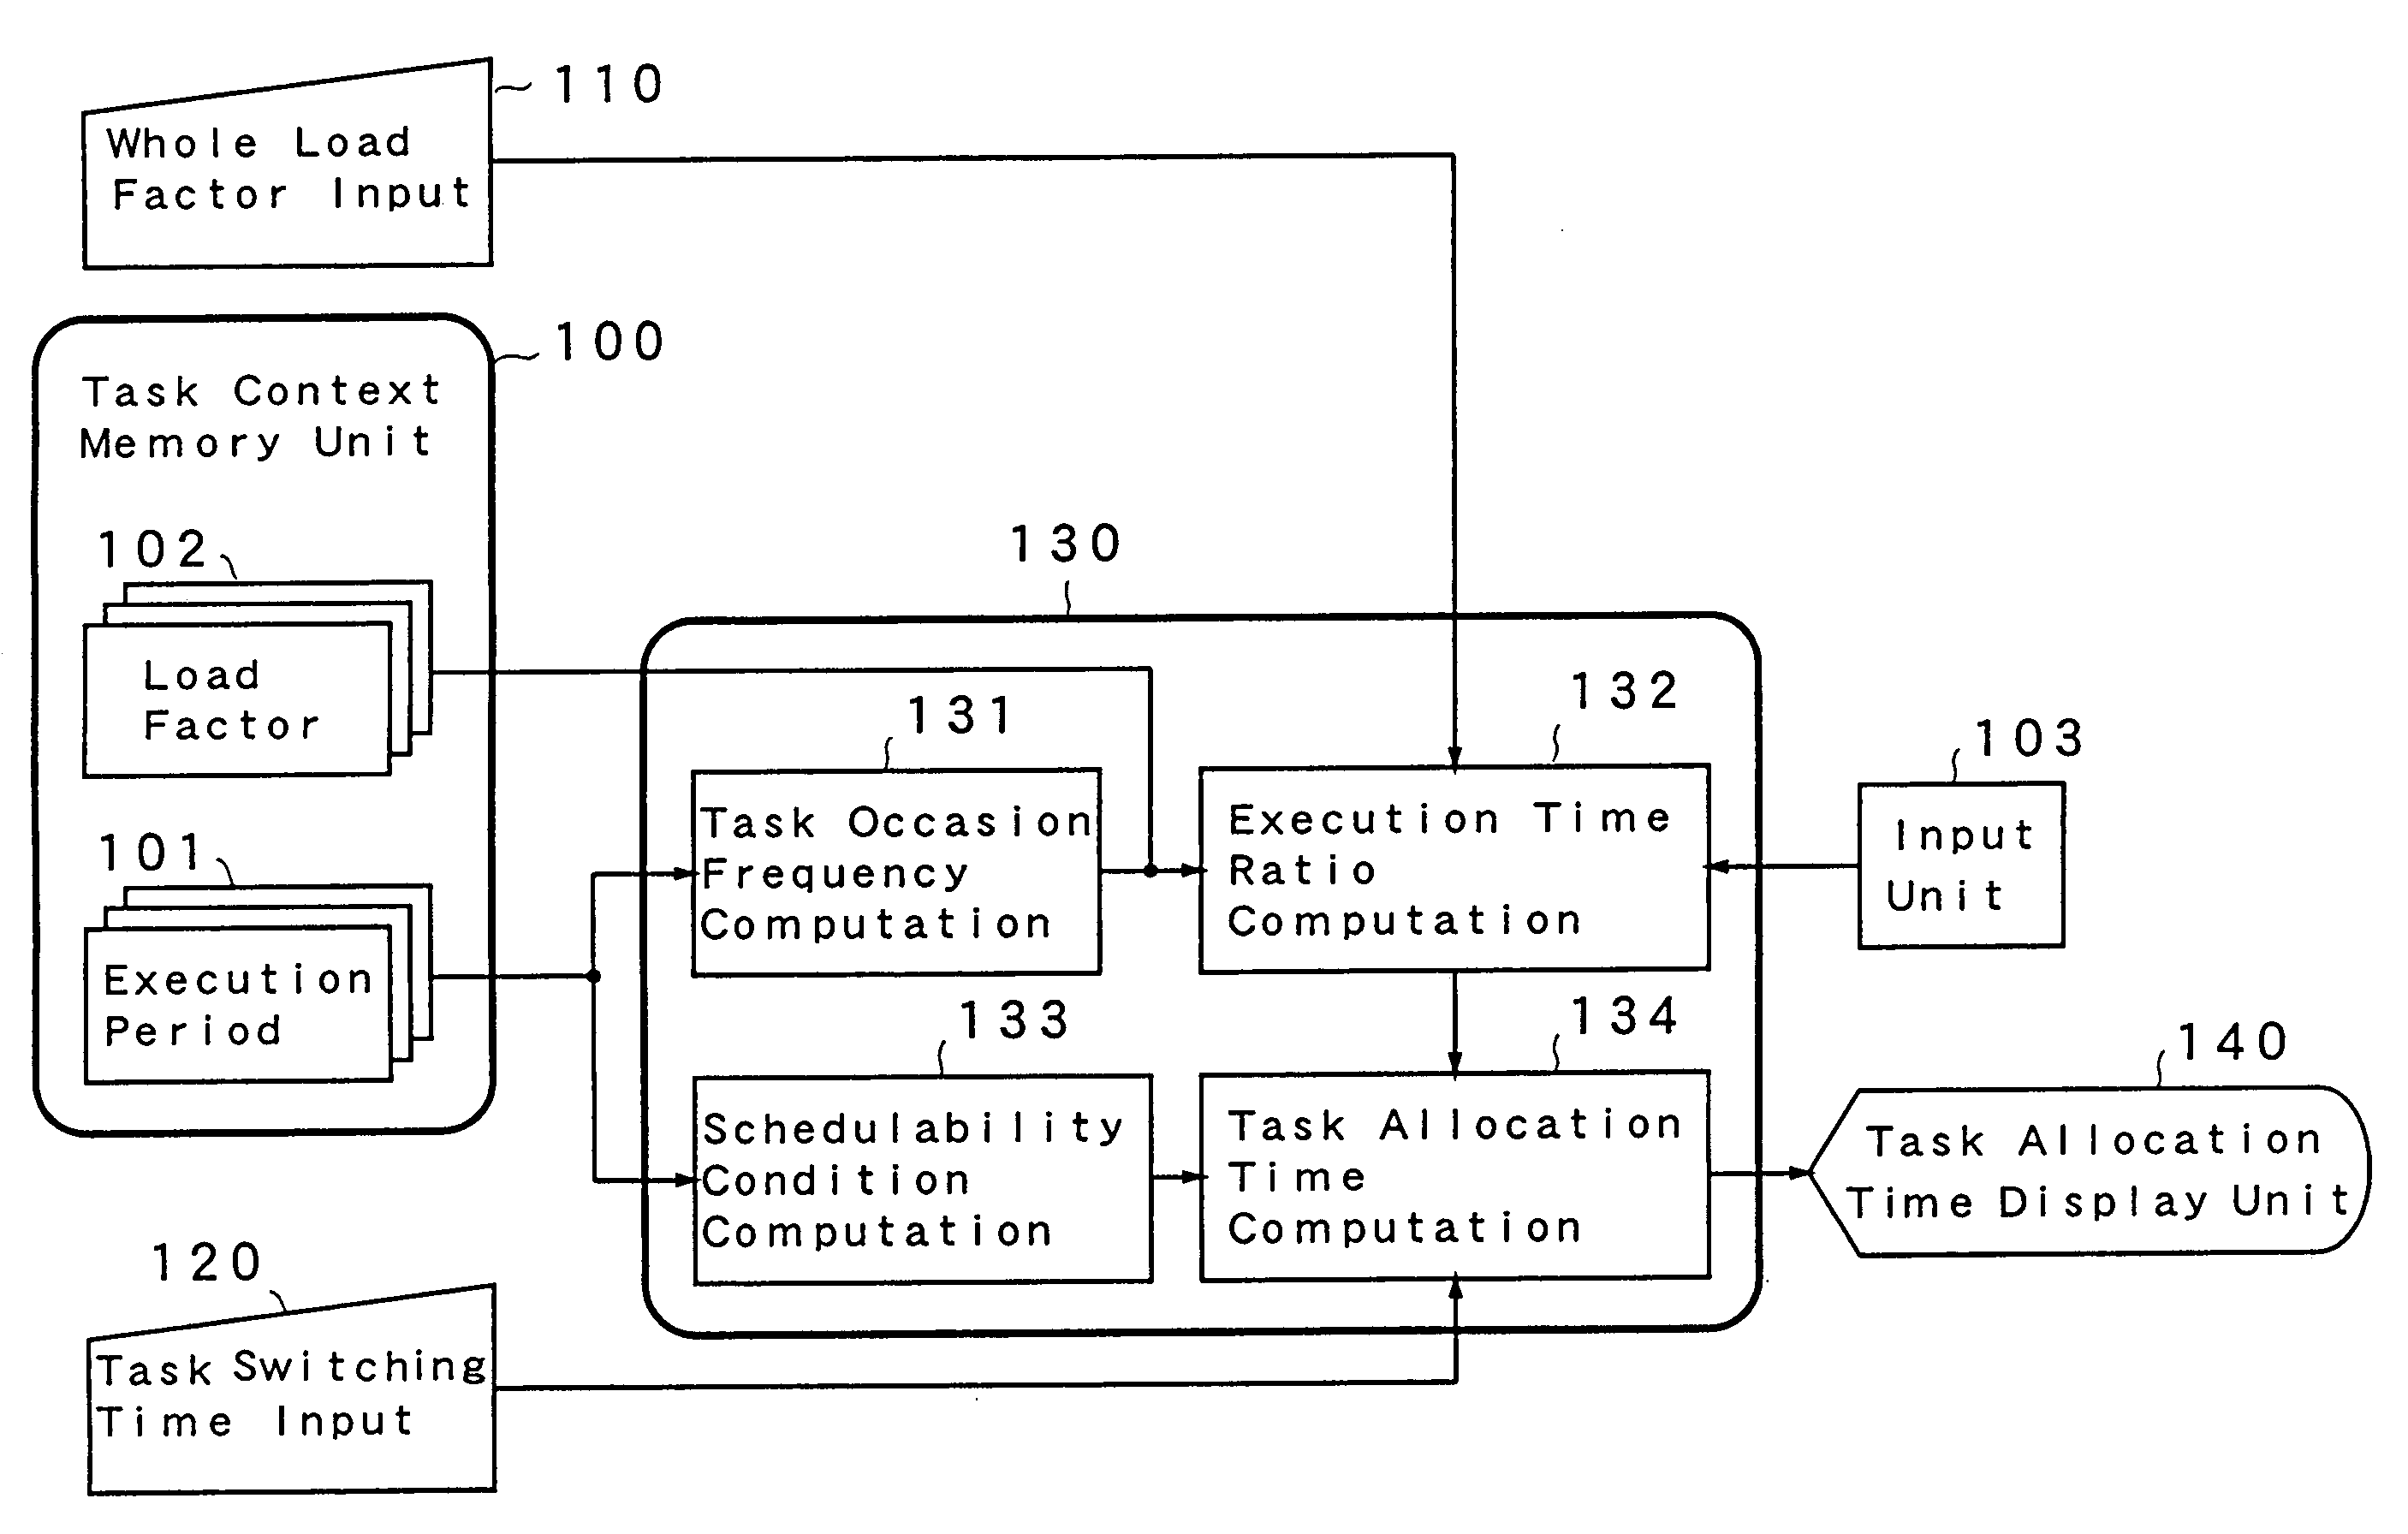 Task allocation time decision apparatus and method of deciding task allocation time